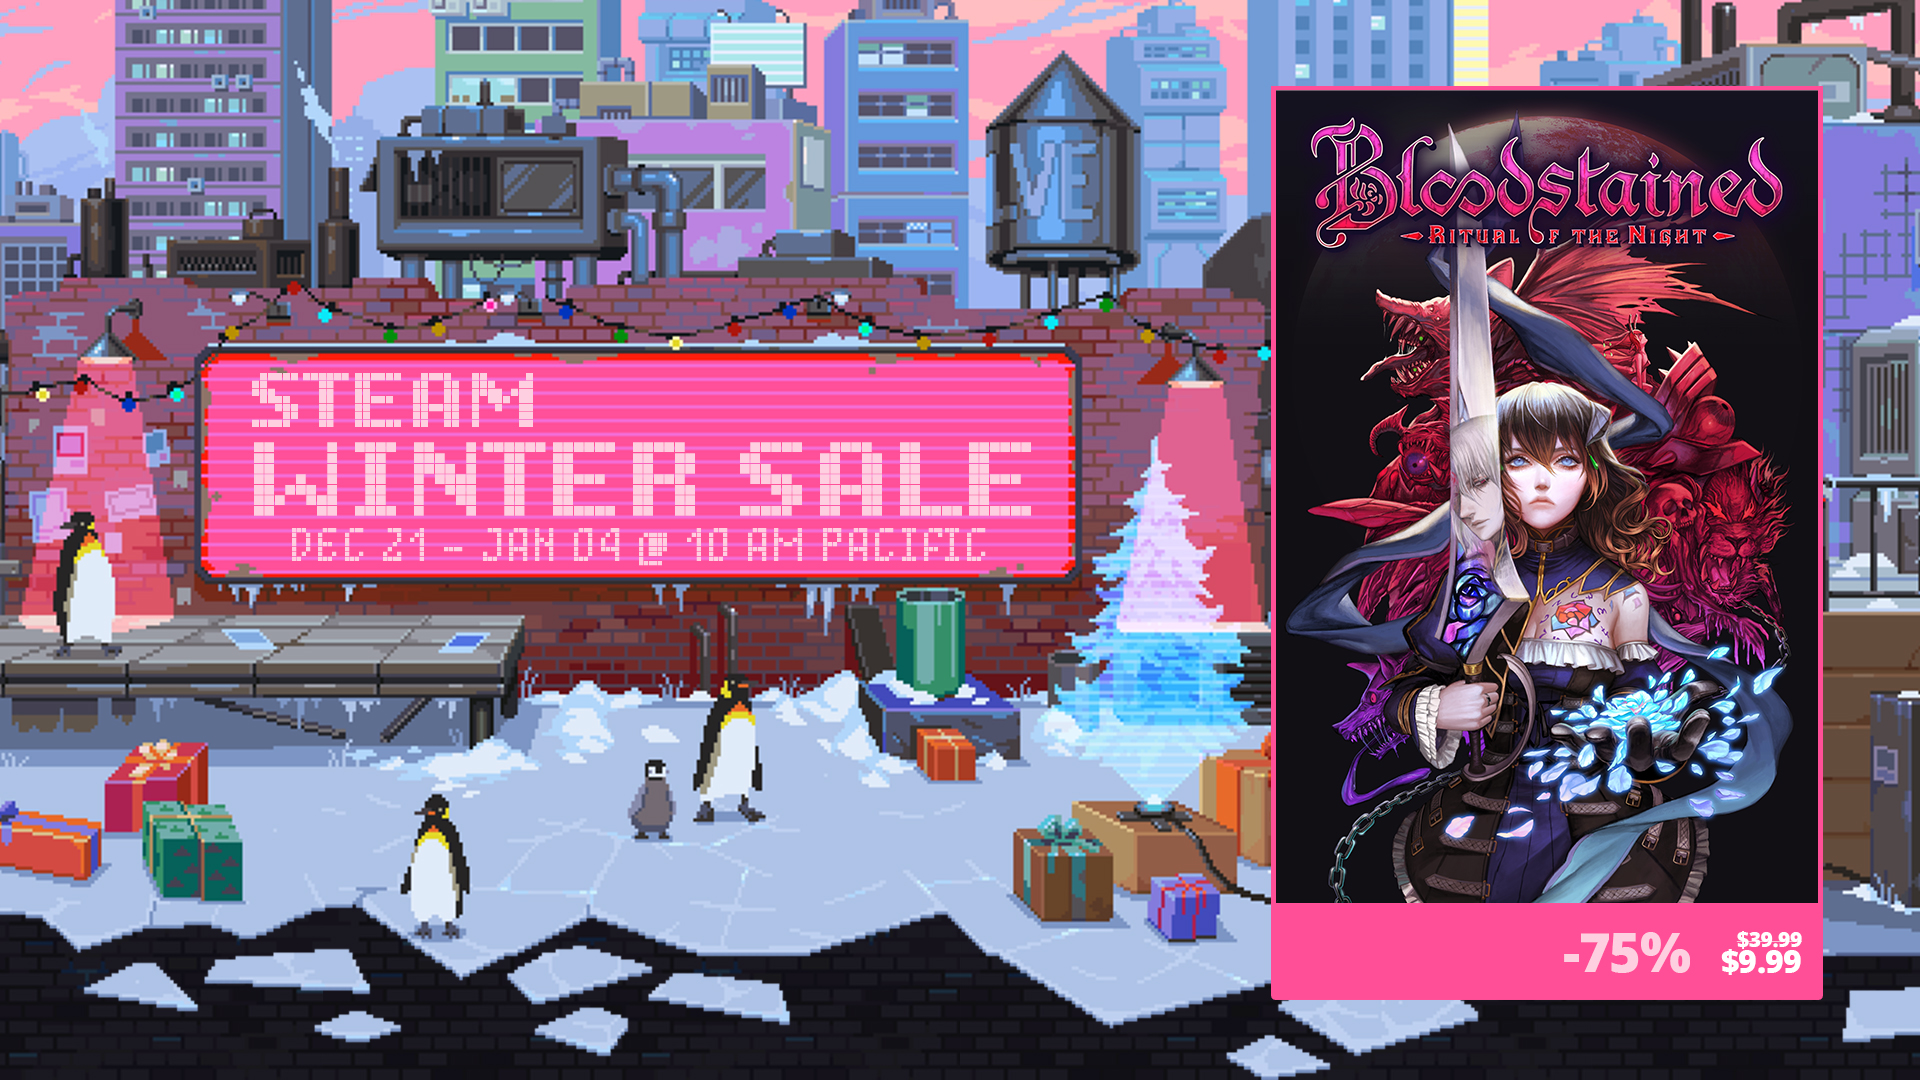 Bloodstained: RotN on X: Enjoy the holidays with Bloodstained! Get tons of  great games on sale, including 75% off Bloodstained: Ritual of the Night,  during the Steam Winter Sale. ❄️  ❄️ #